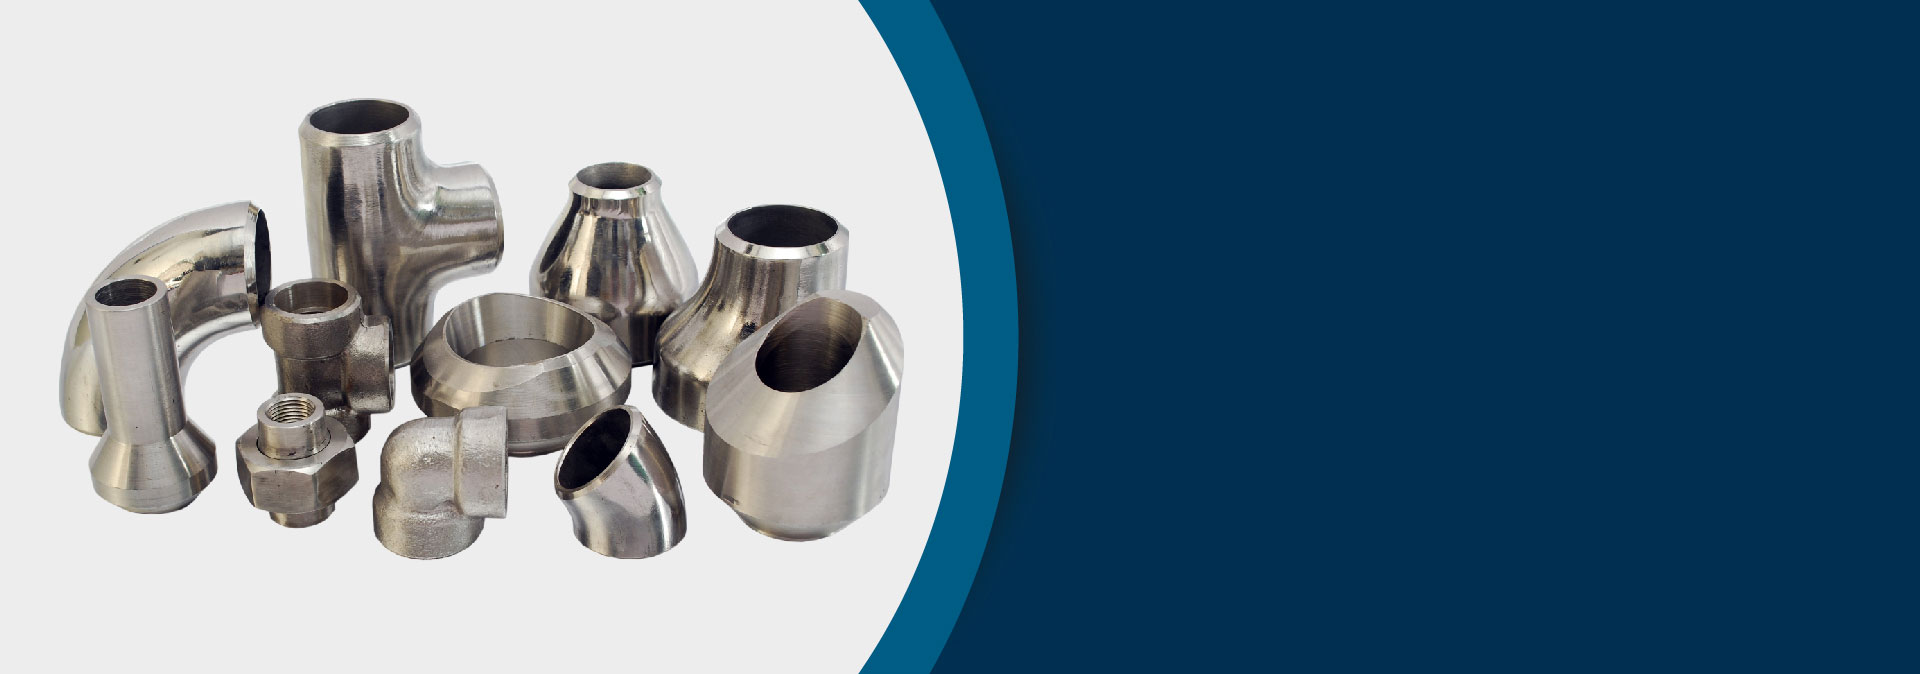 Manufacturer & Stockist of Pipe Fittings, Socket Weld,Butt Weld & Screwed Pipe Fittings.